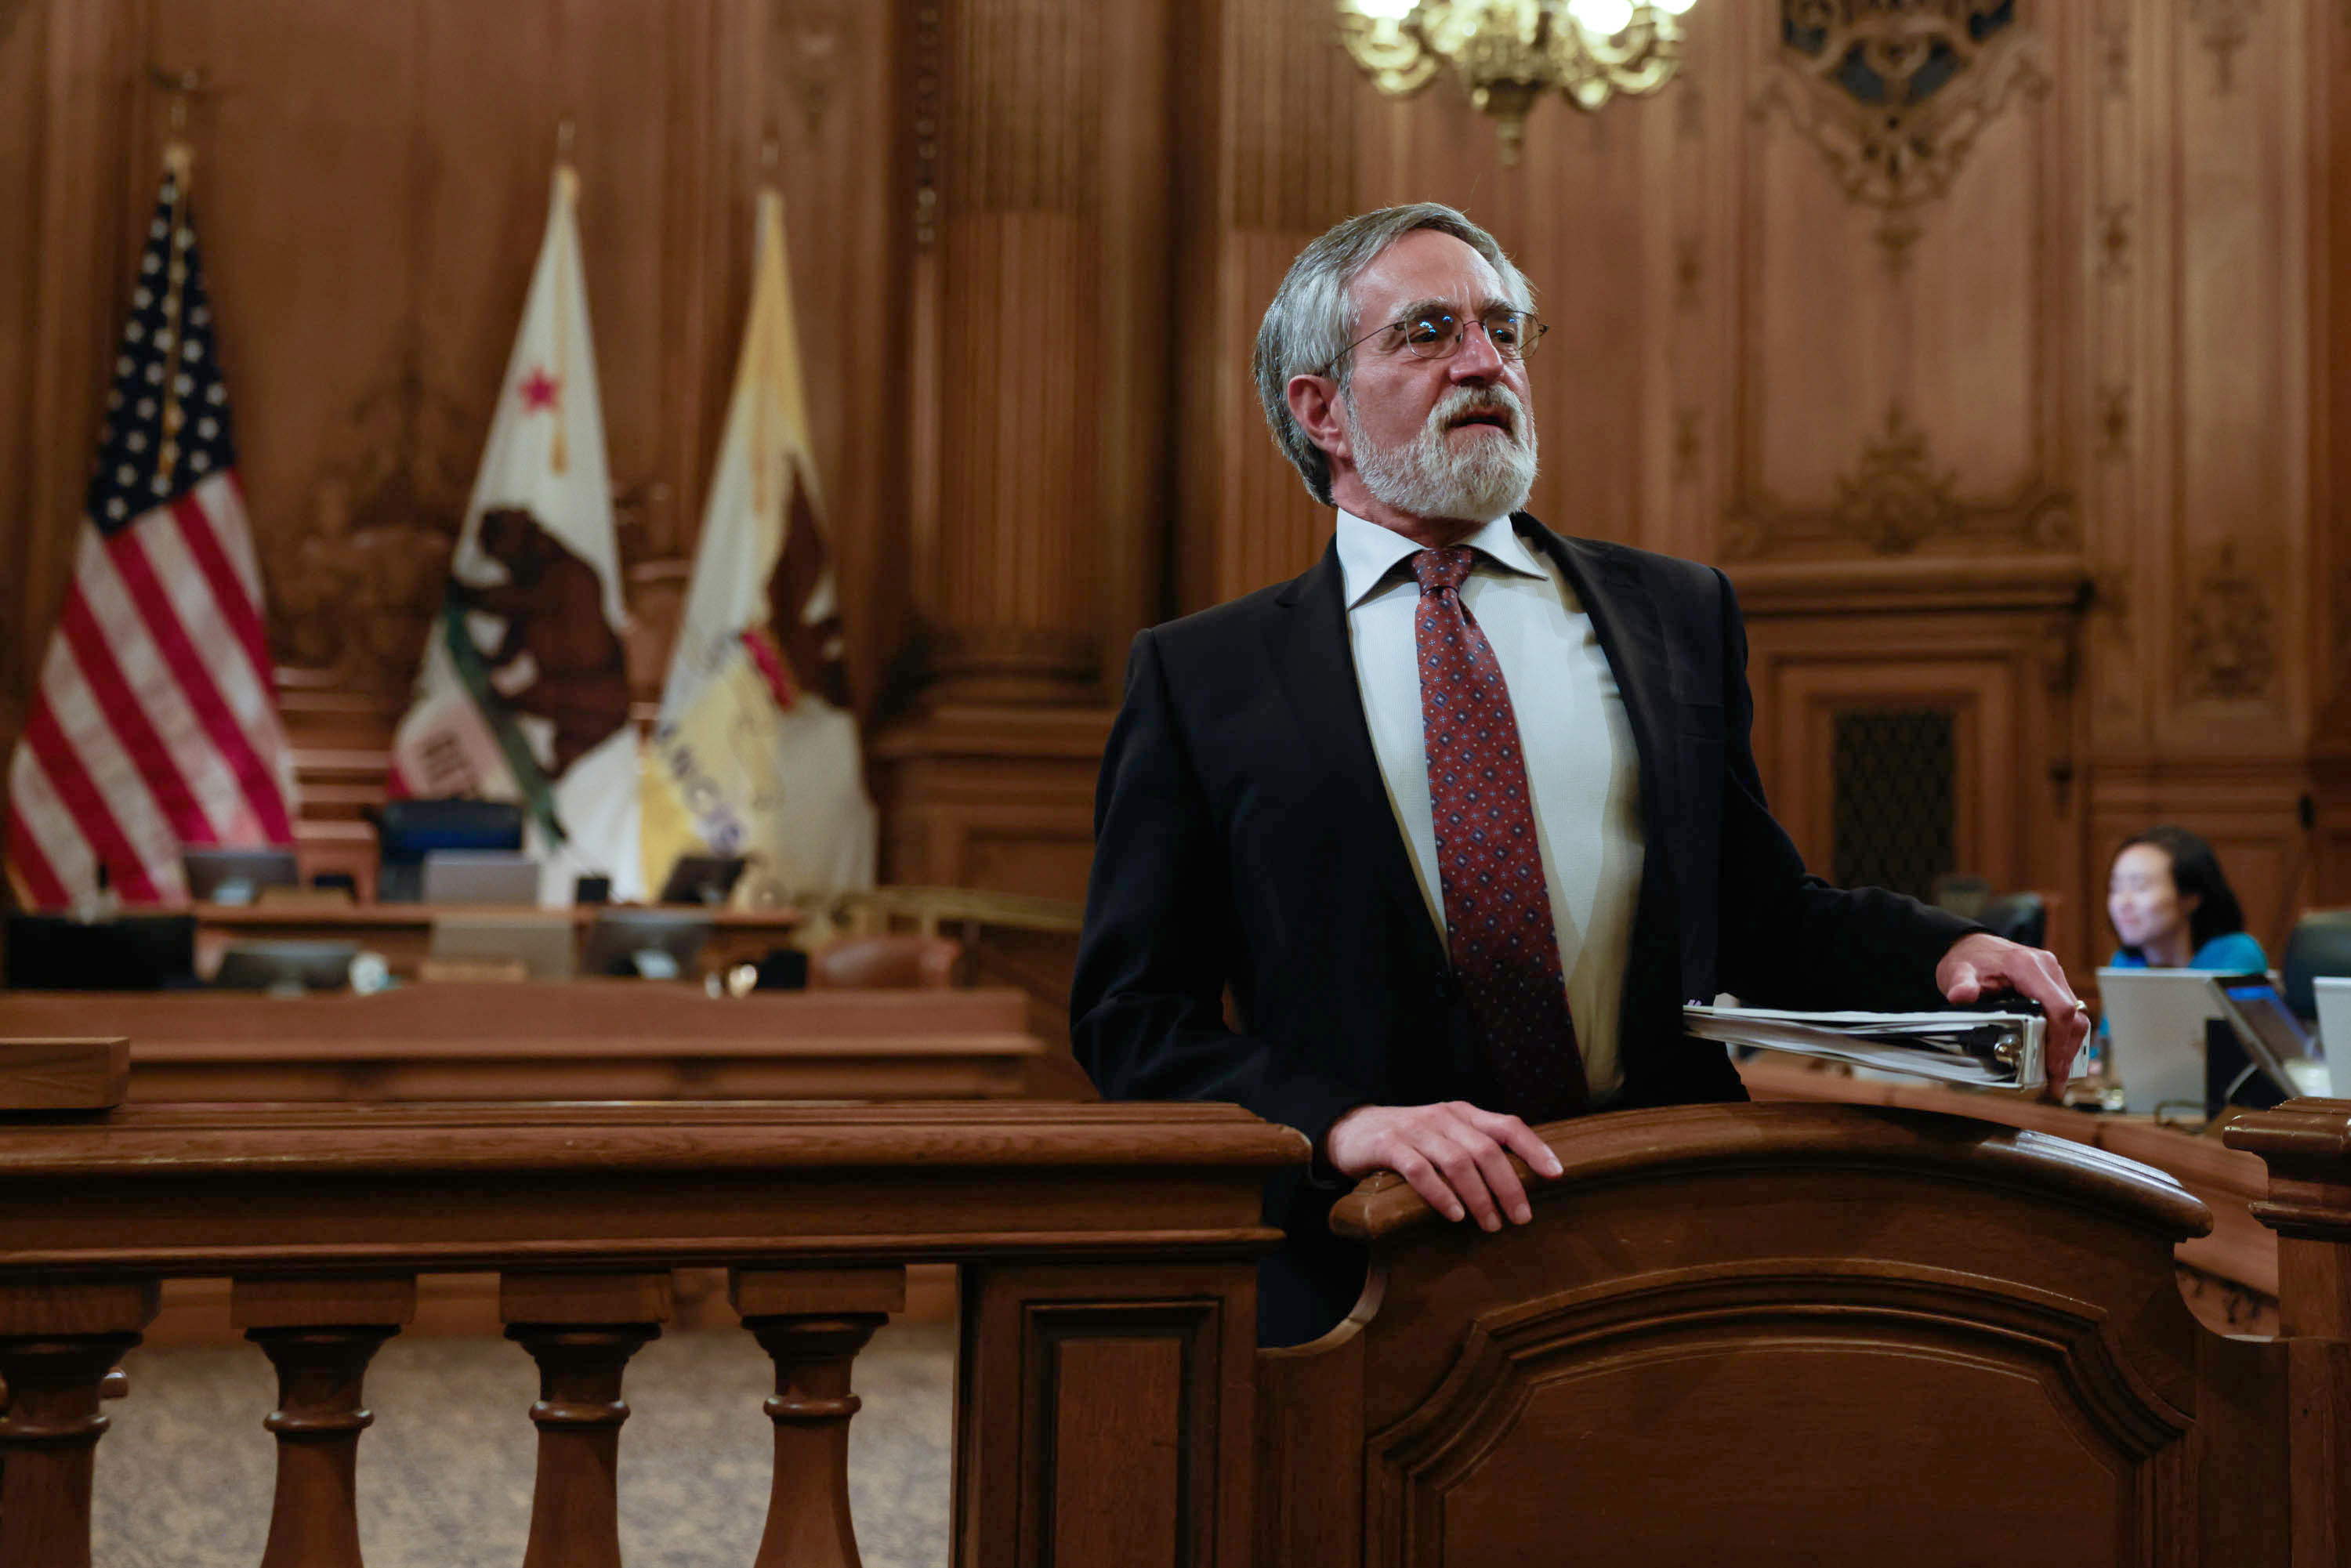 A man stands at a podium in a grand room with flags and a person working in the background.